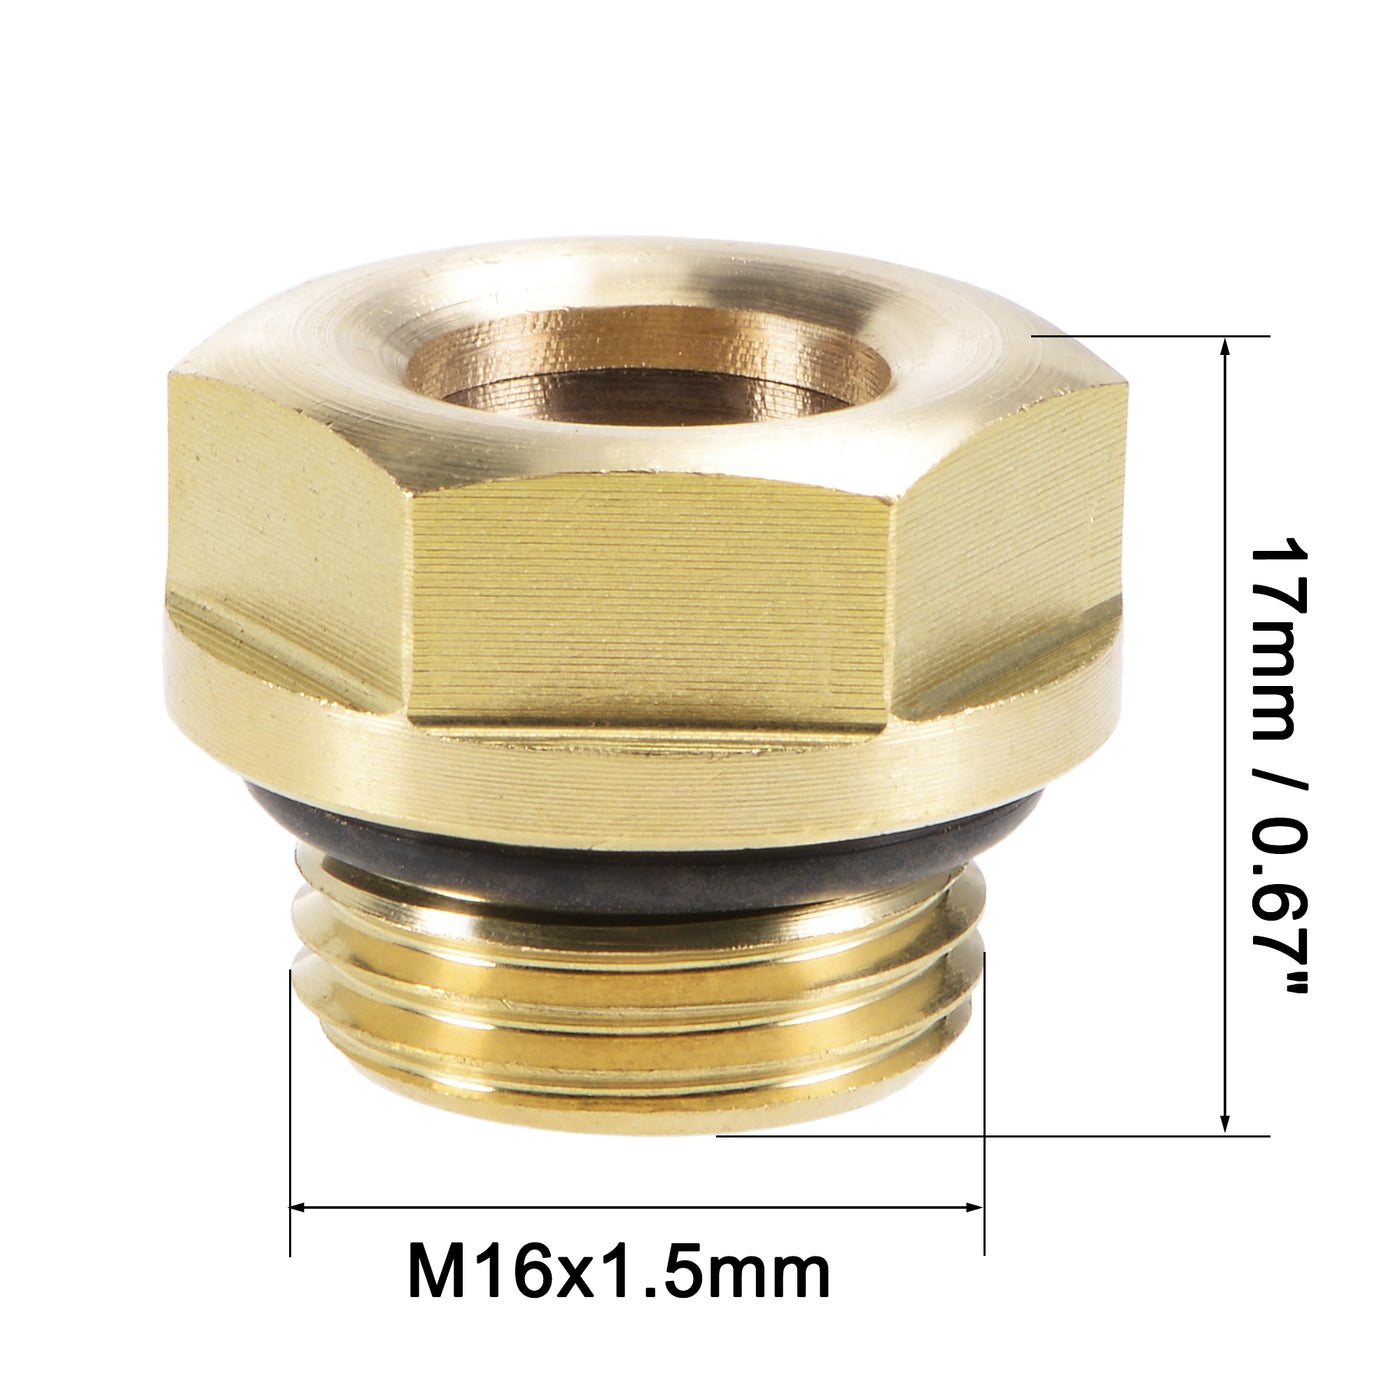 Uxcell Uxcell Oil Liquid Level Gauge Sight Glass M22x1.5mm Male Threaded Brass Air Compressor Fittings with O-Ring, Yellow 2Pcs